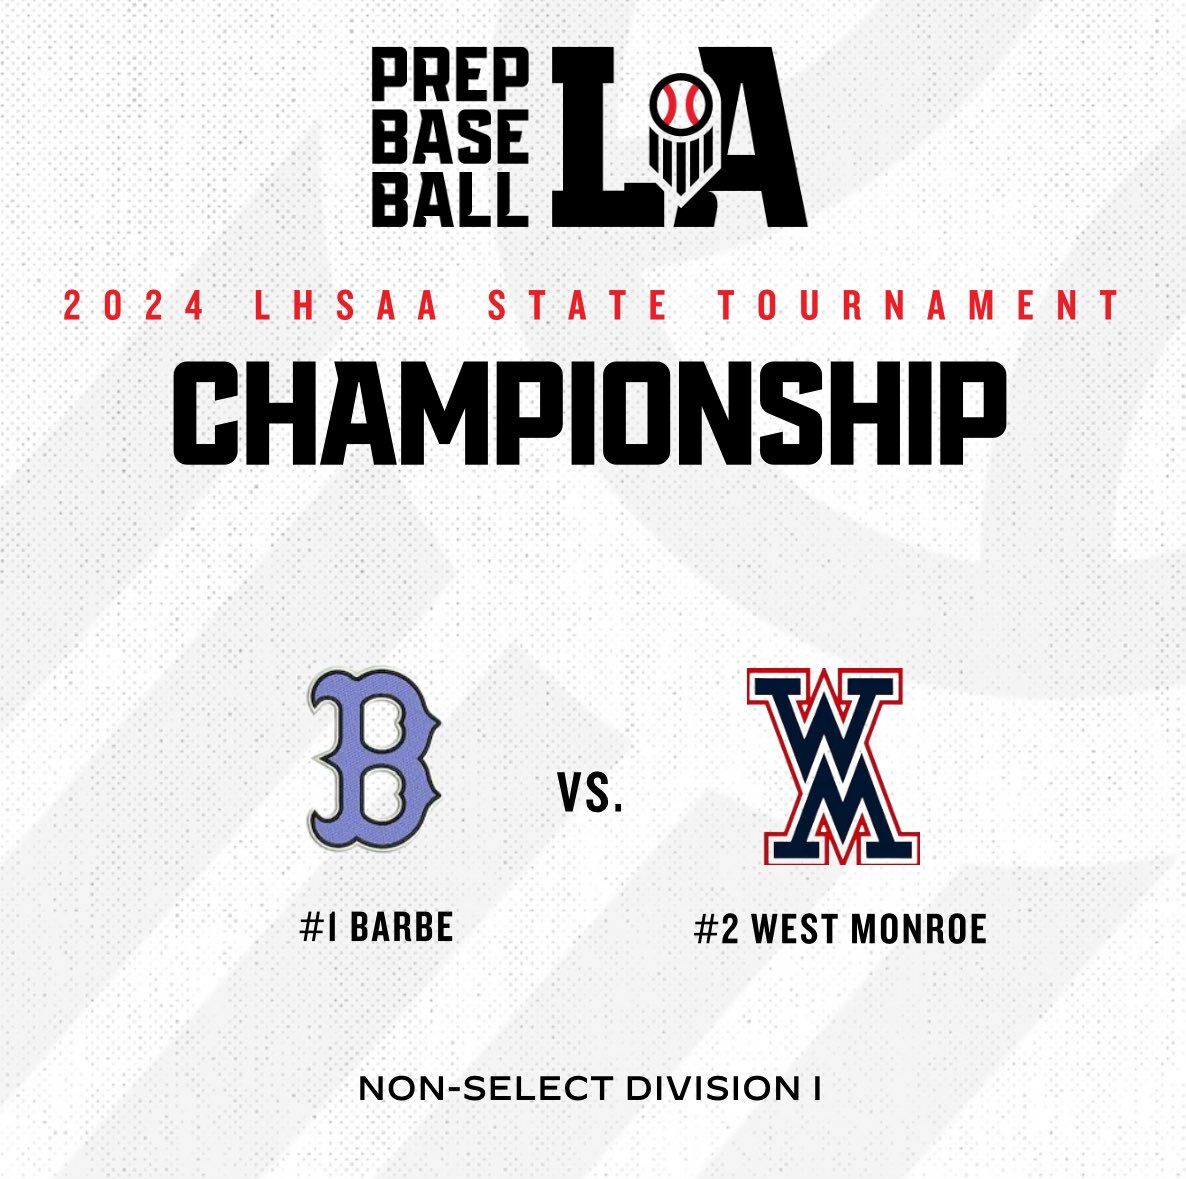 🔥🏆 Game time alert! Tomorrow at 5:30 PM CT, No. 1 @BarbeBaseball71 faces No. 2 @RebelBaseball1 in a rematch of last year's @LHSAAsports title game! ⚾🏟️ Barbe's field boasts Brock SP14XL shock pads & BrockFILL, plus @AstroTurfUSA, enhancing safety & performance! @PrepBaseballLA